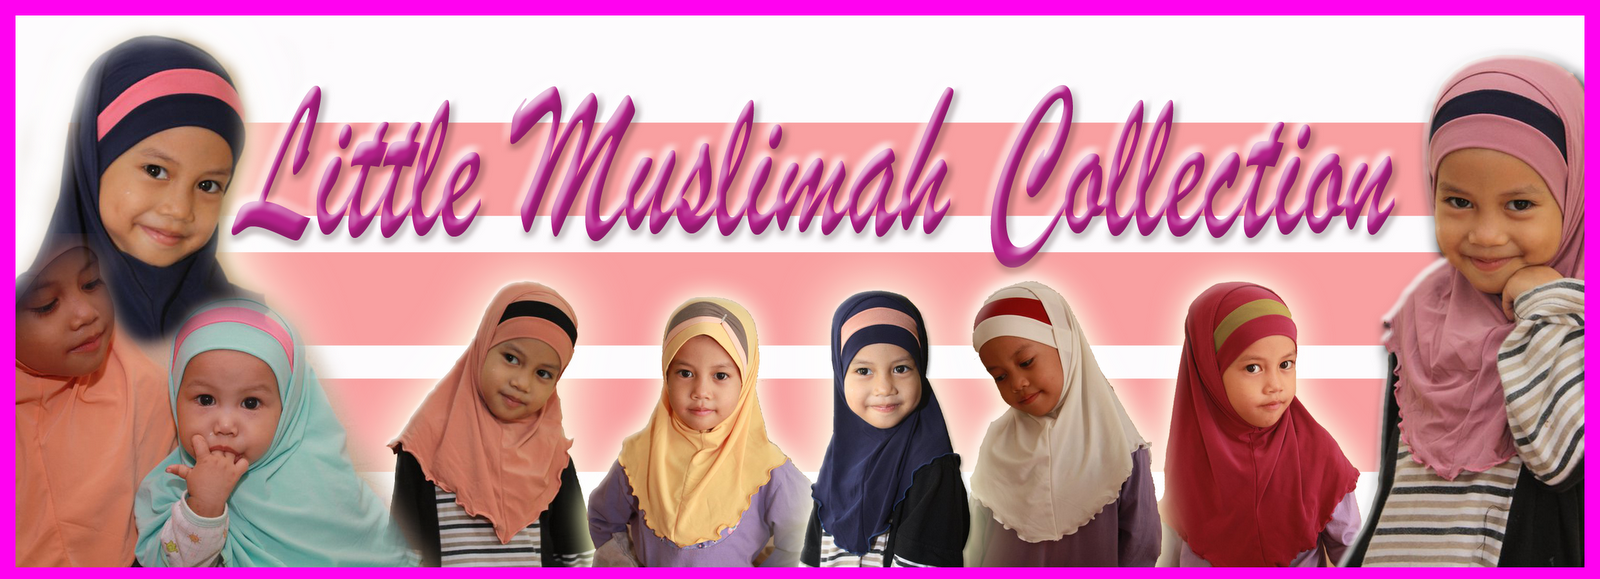 LITTLE MUSLIMAH COLLECTION